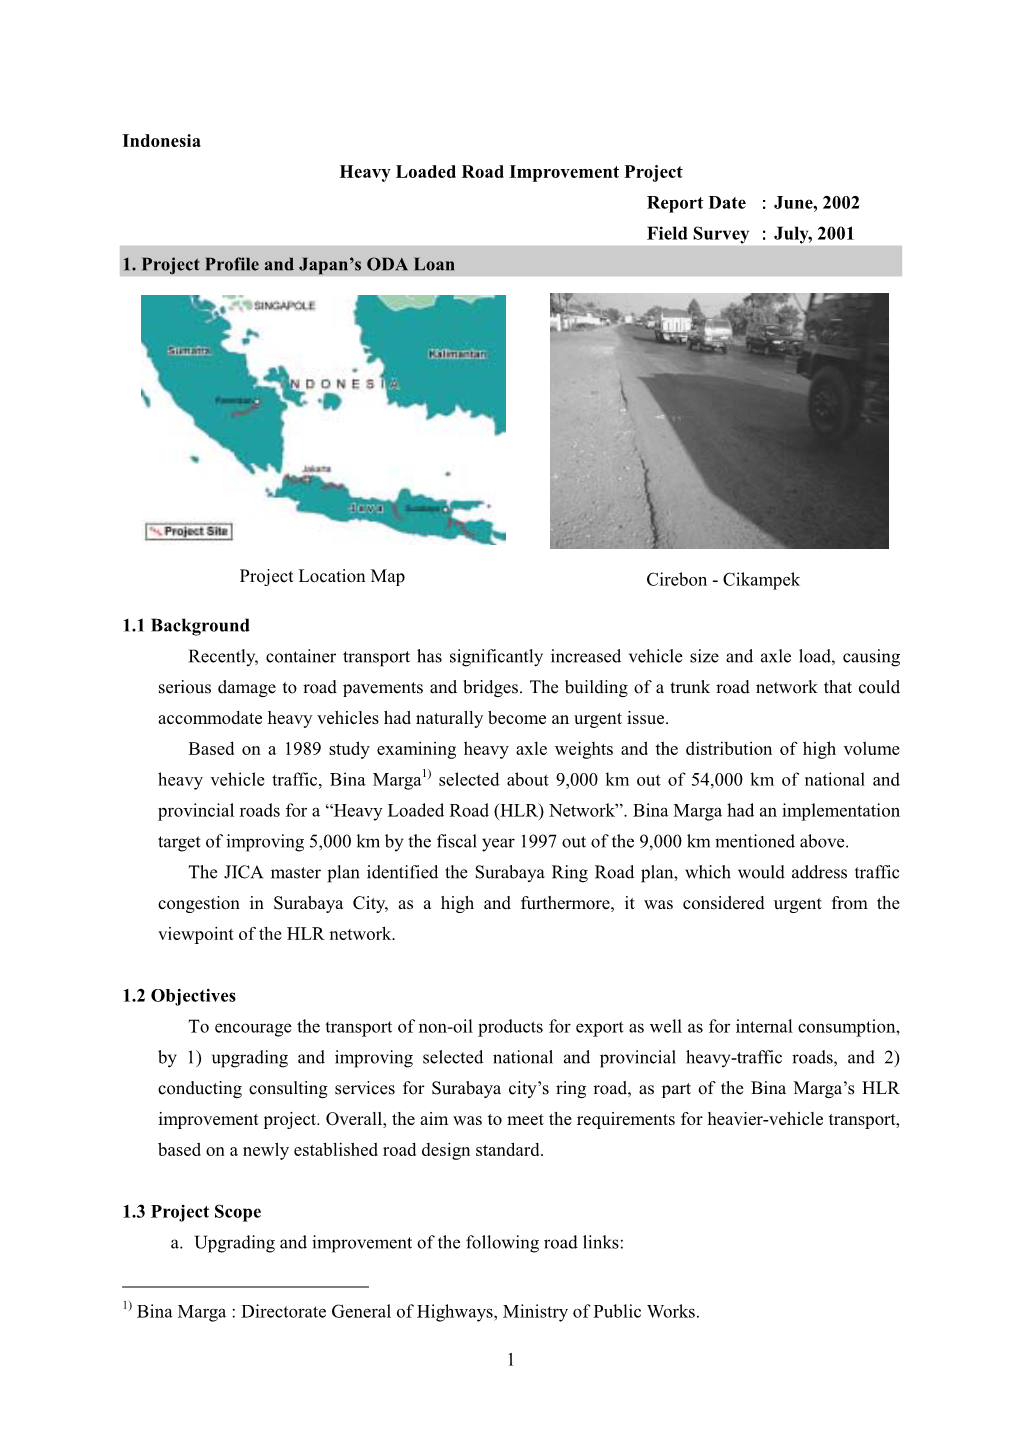 1 Indonesia Heavy Loaded Road Improvement Project Report